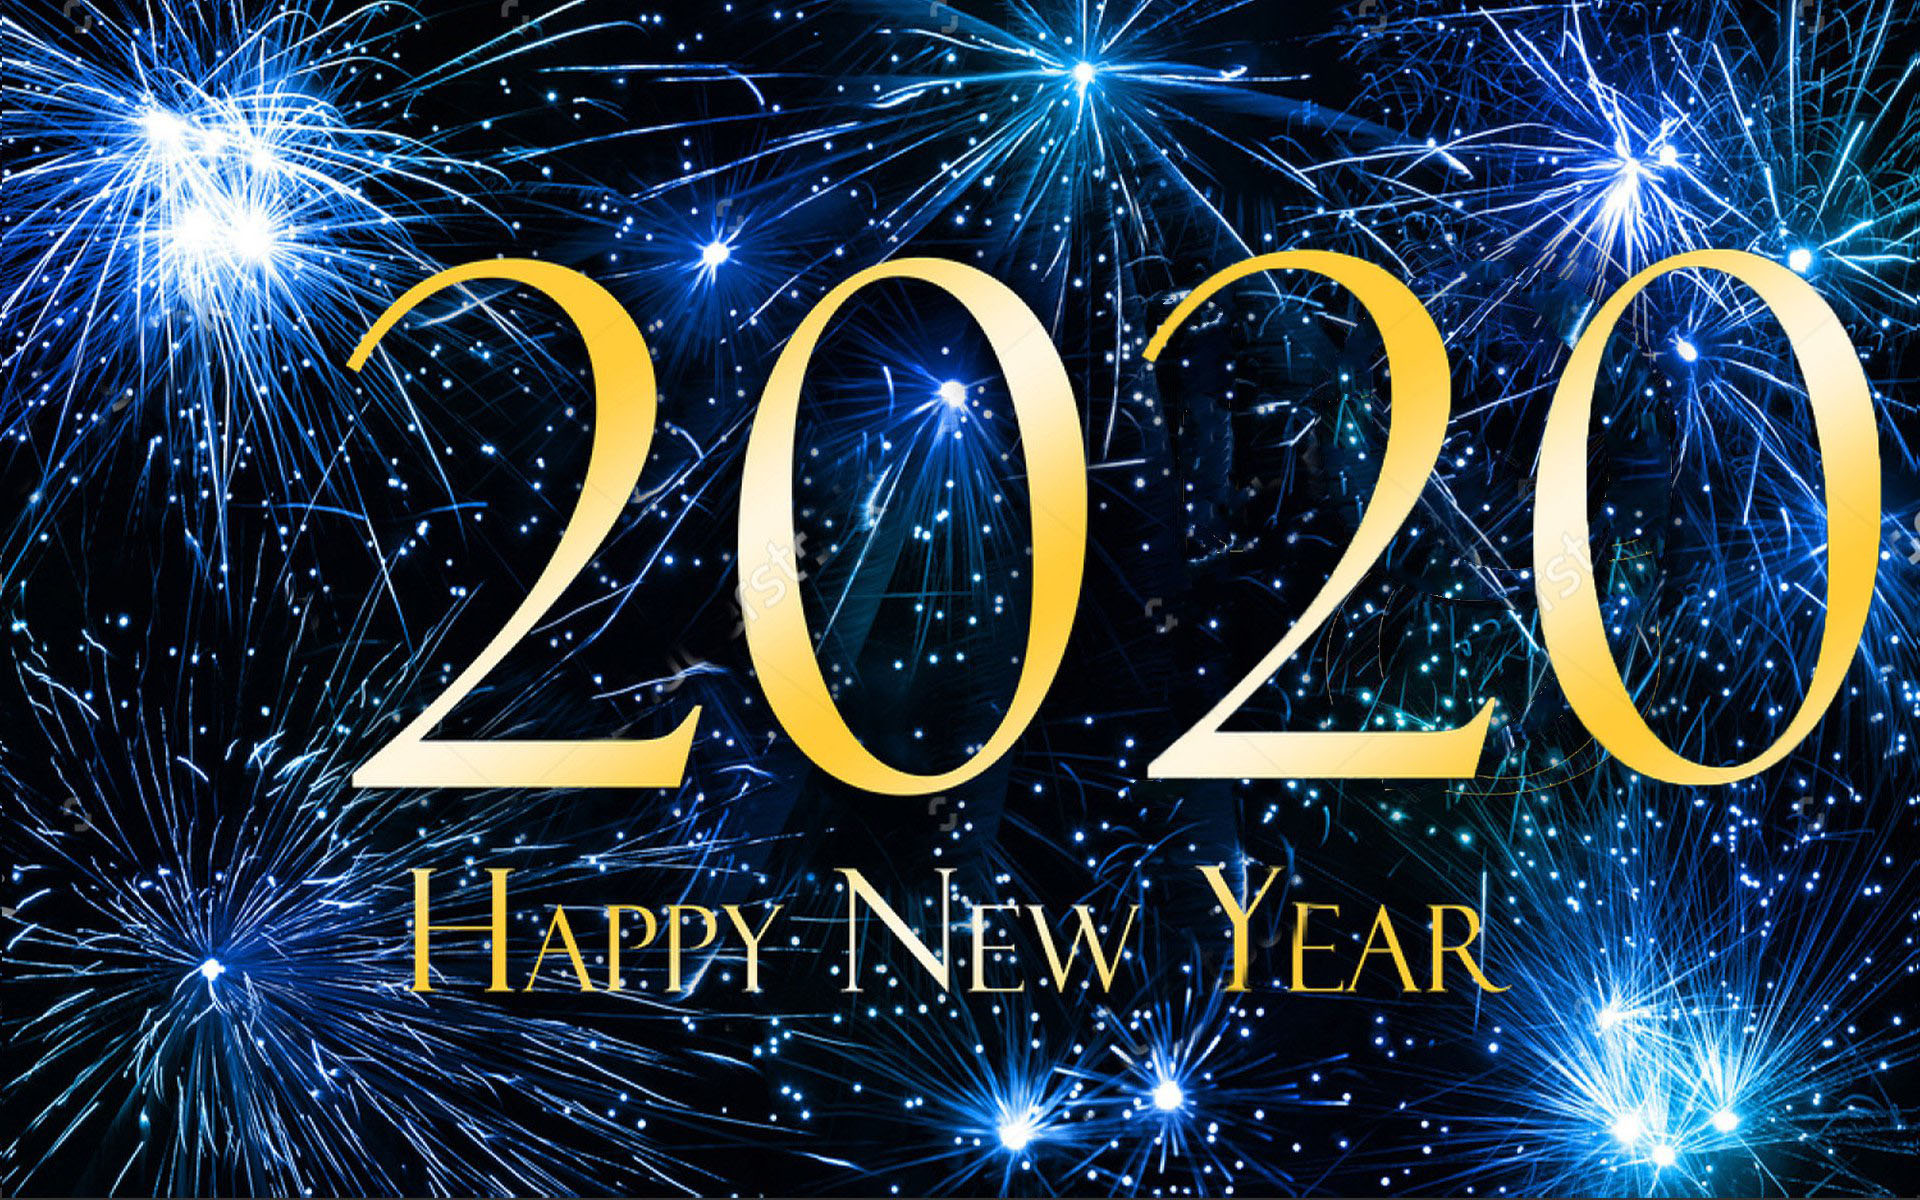 Happy New Year Blue HD Wallpaper For Laptop And Tablet